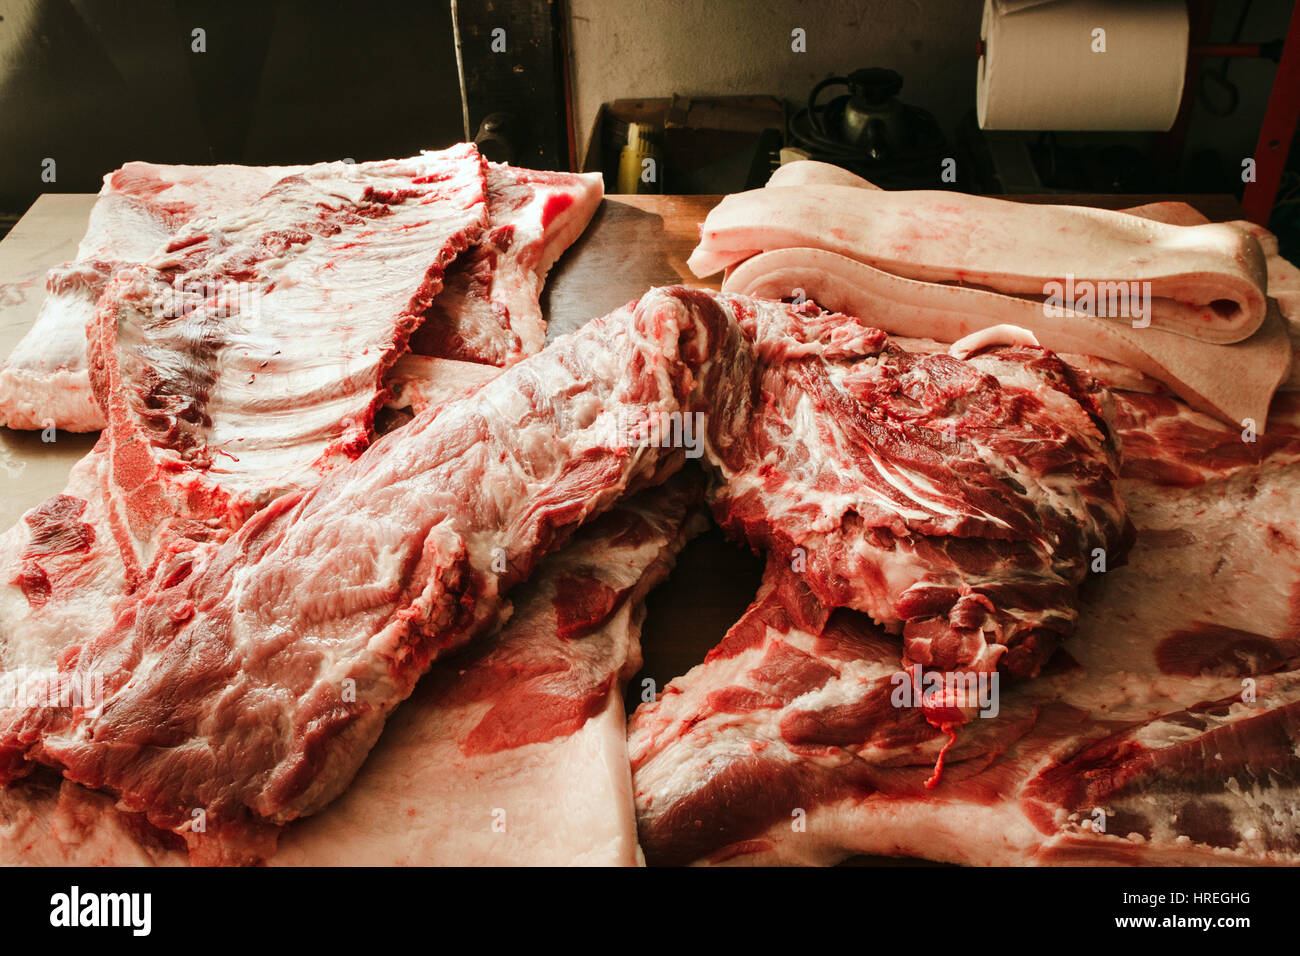 Fresh pork meat from a slaughterhouse in Alba, which is located in the province of Piedmont, Italy. Stock Photo